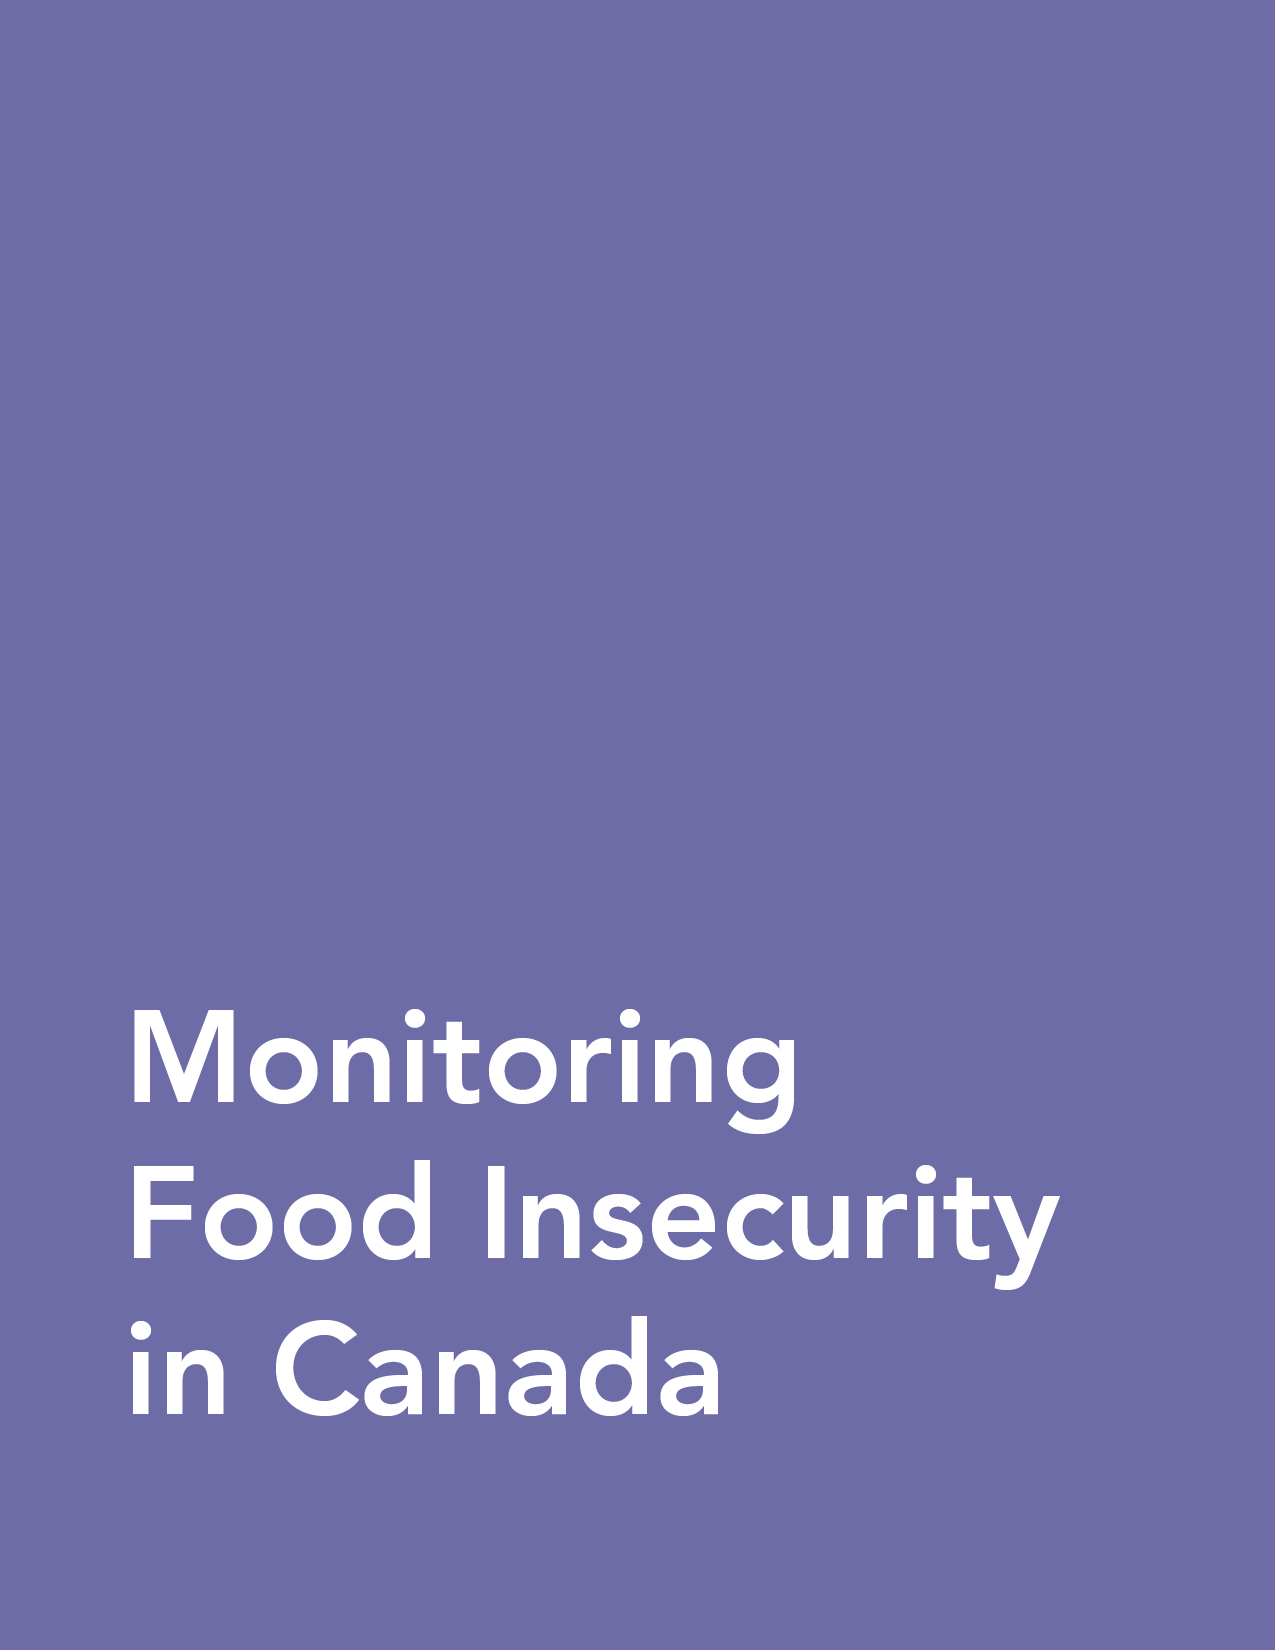 Monitoring Food Insecurity in Canada